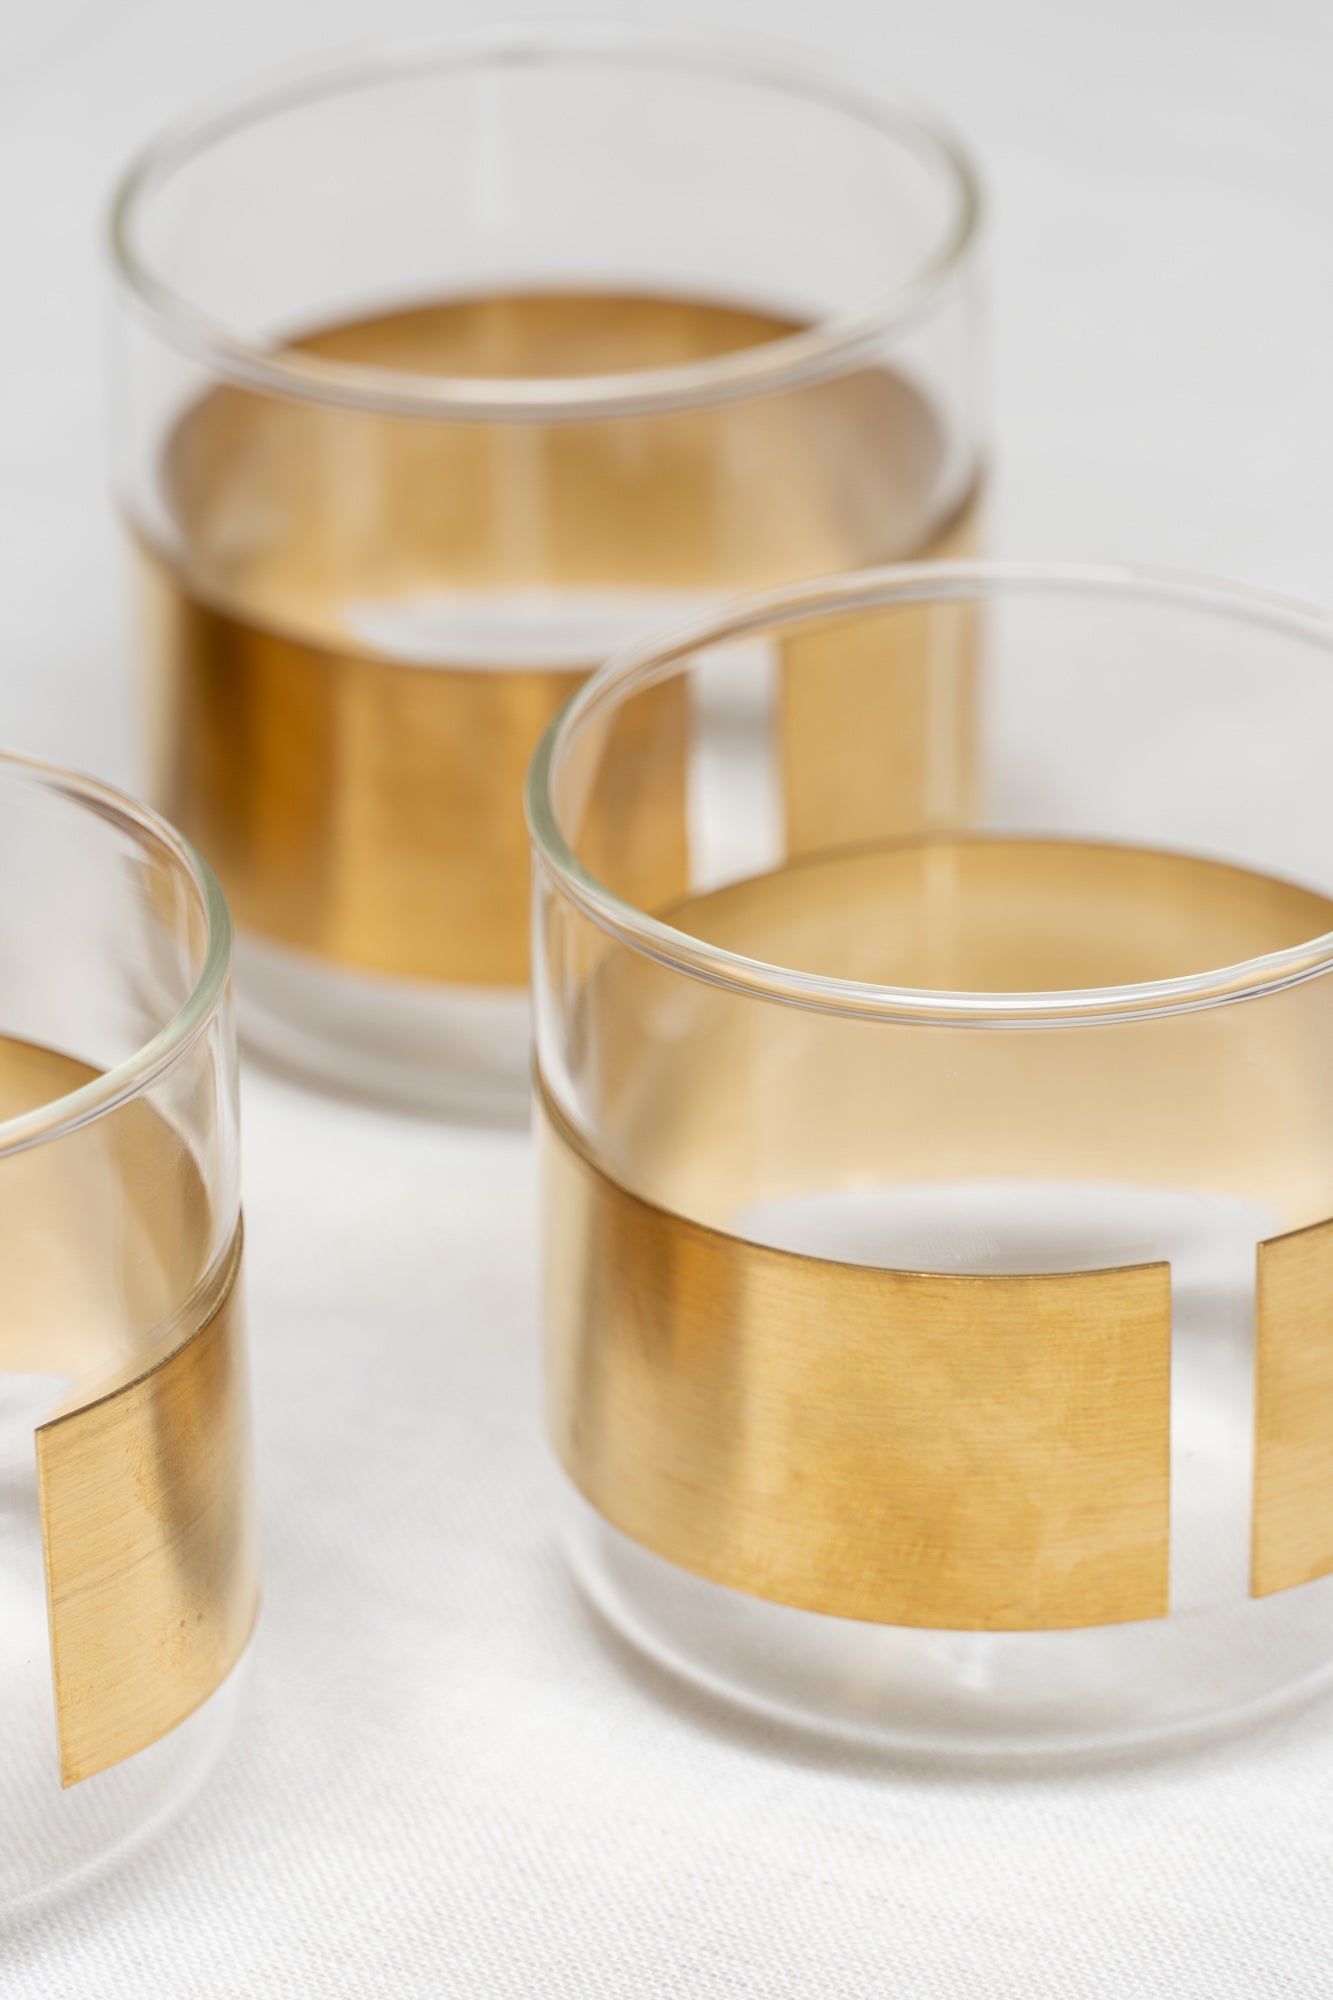 Close-up of the Copper Alchemy Chemistry Glasses by Serax.